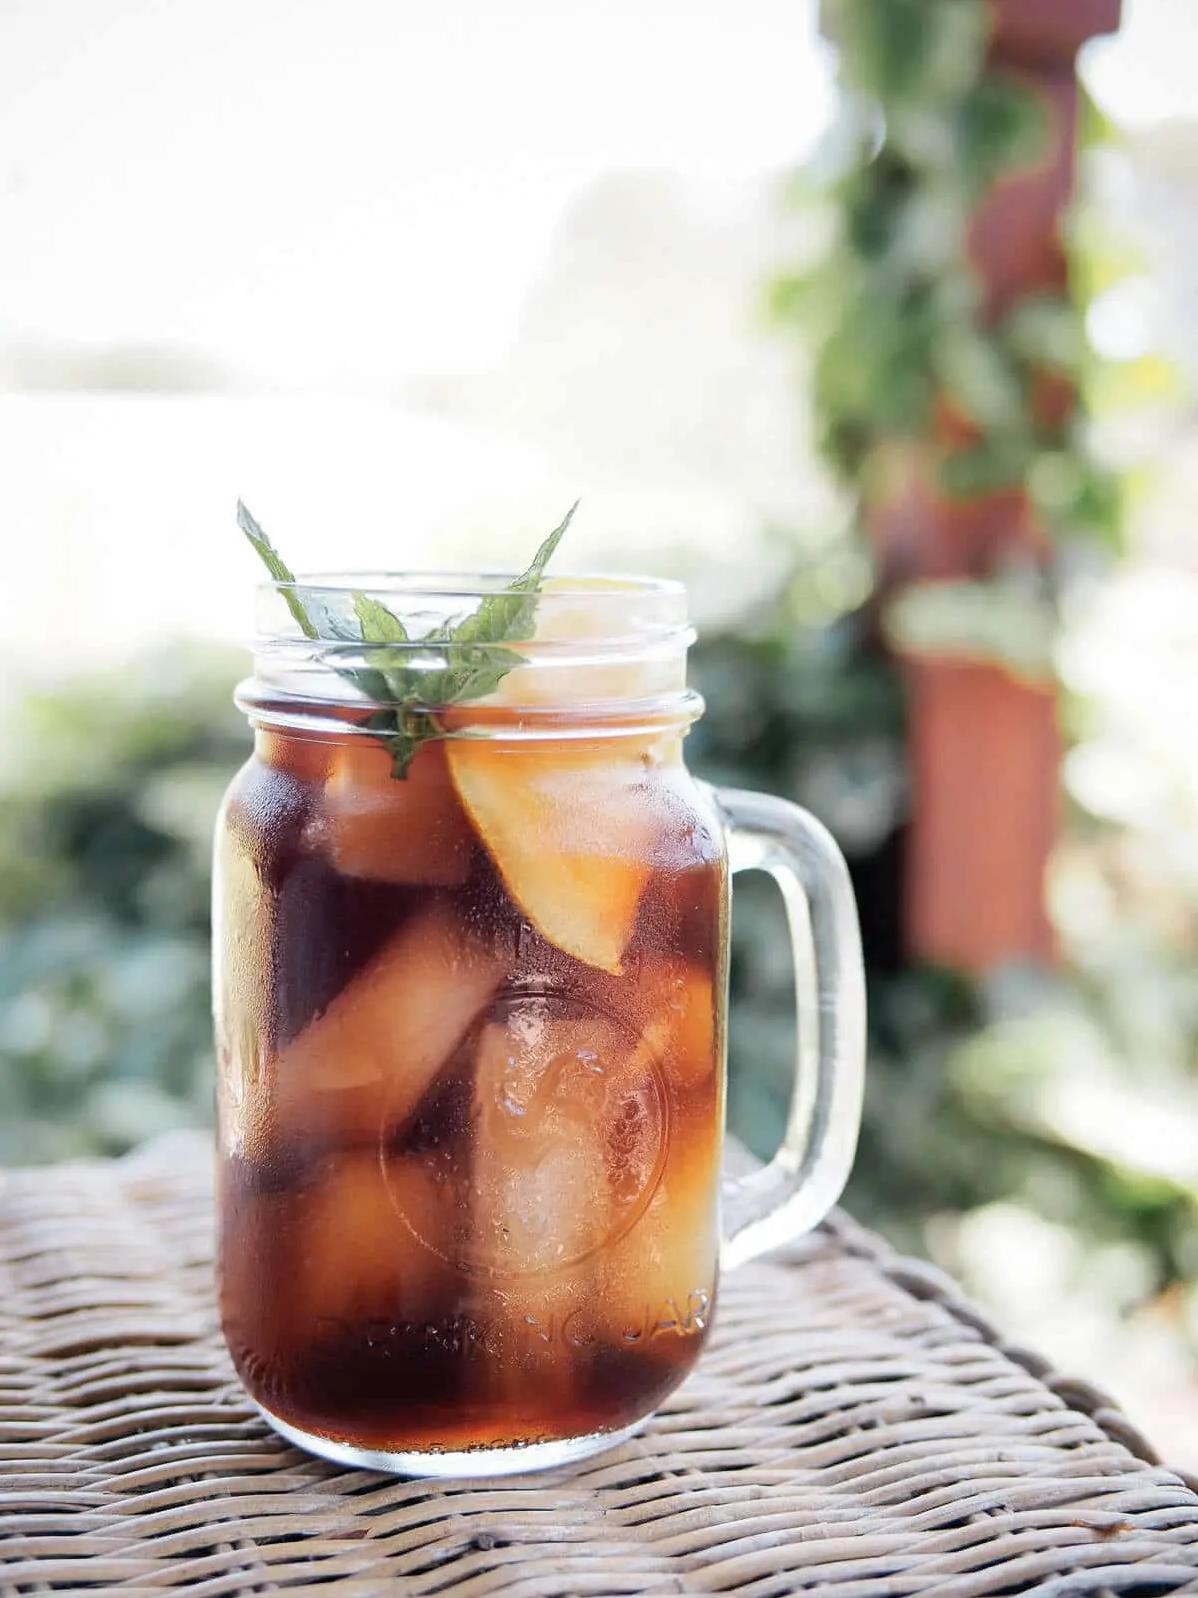  Ah! The golden color of freshly brewed southern iced tea is a sight for sore eyes!